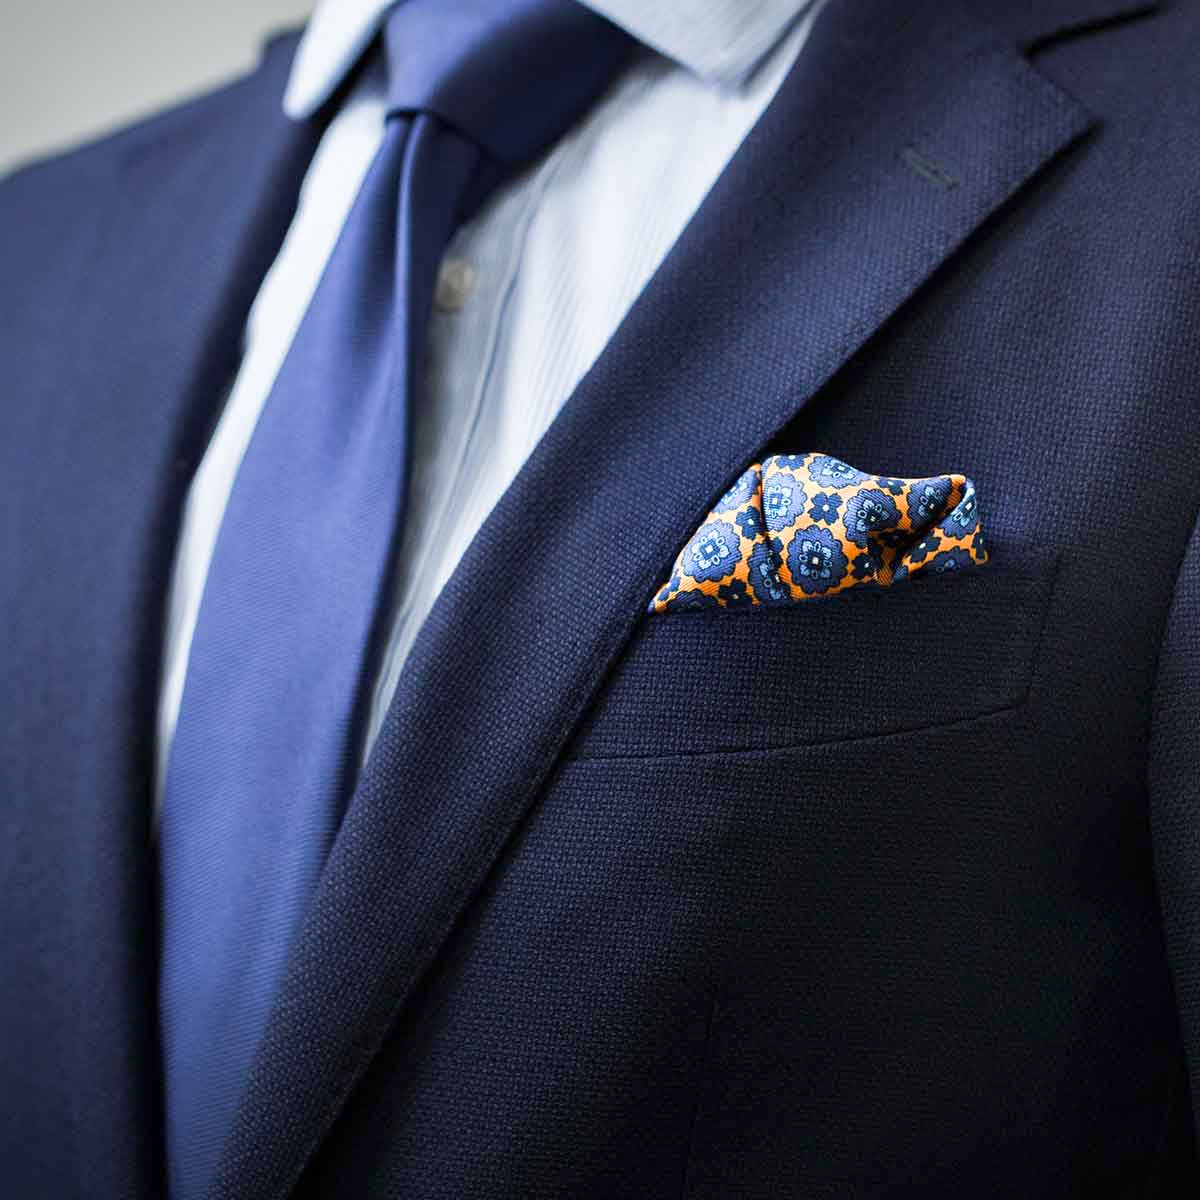 navy blue tie and blue/oragne paisley pocket square